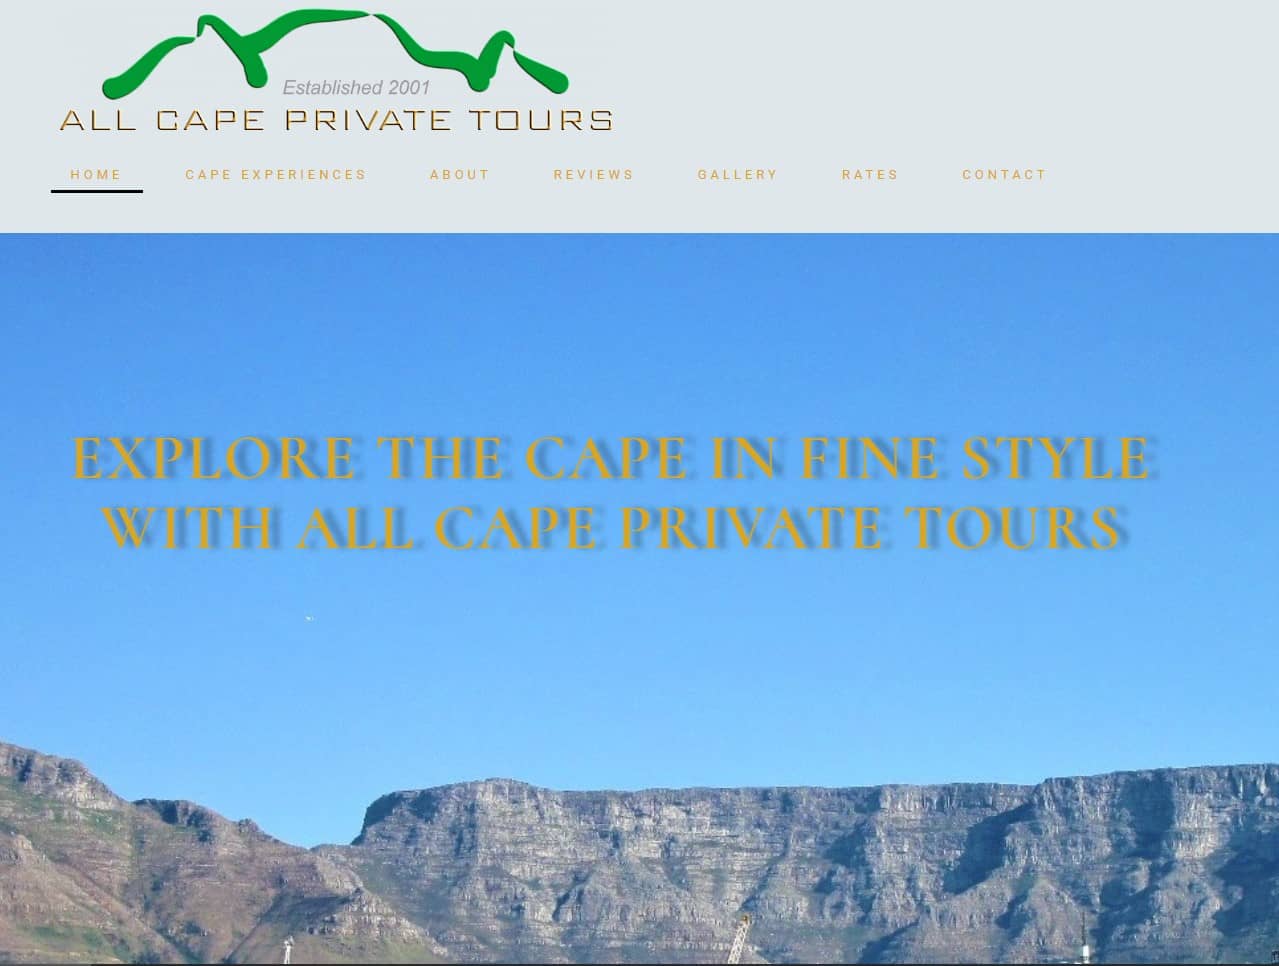 All Cape Private Tours' website home page